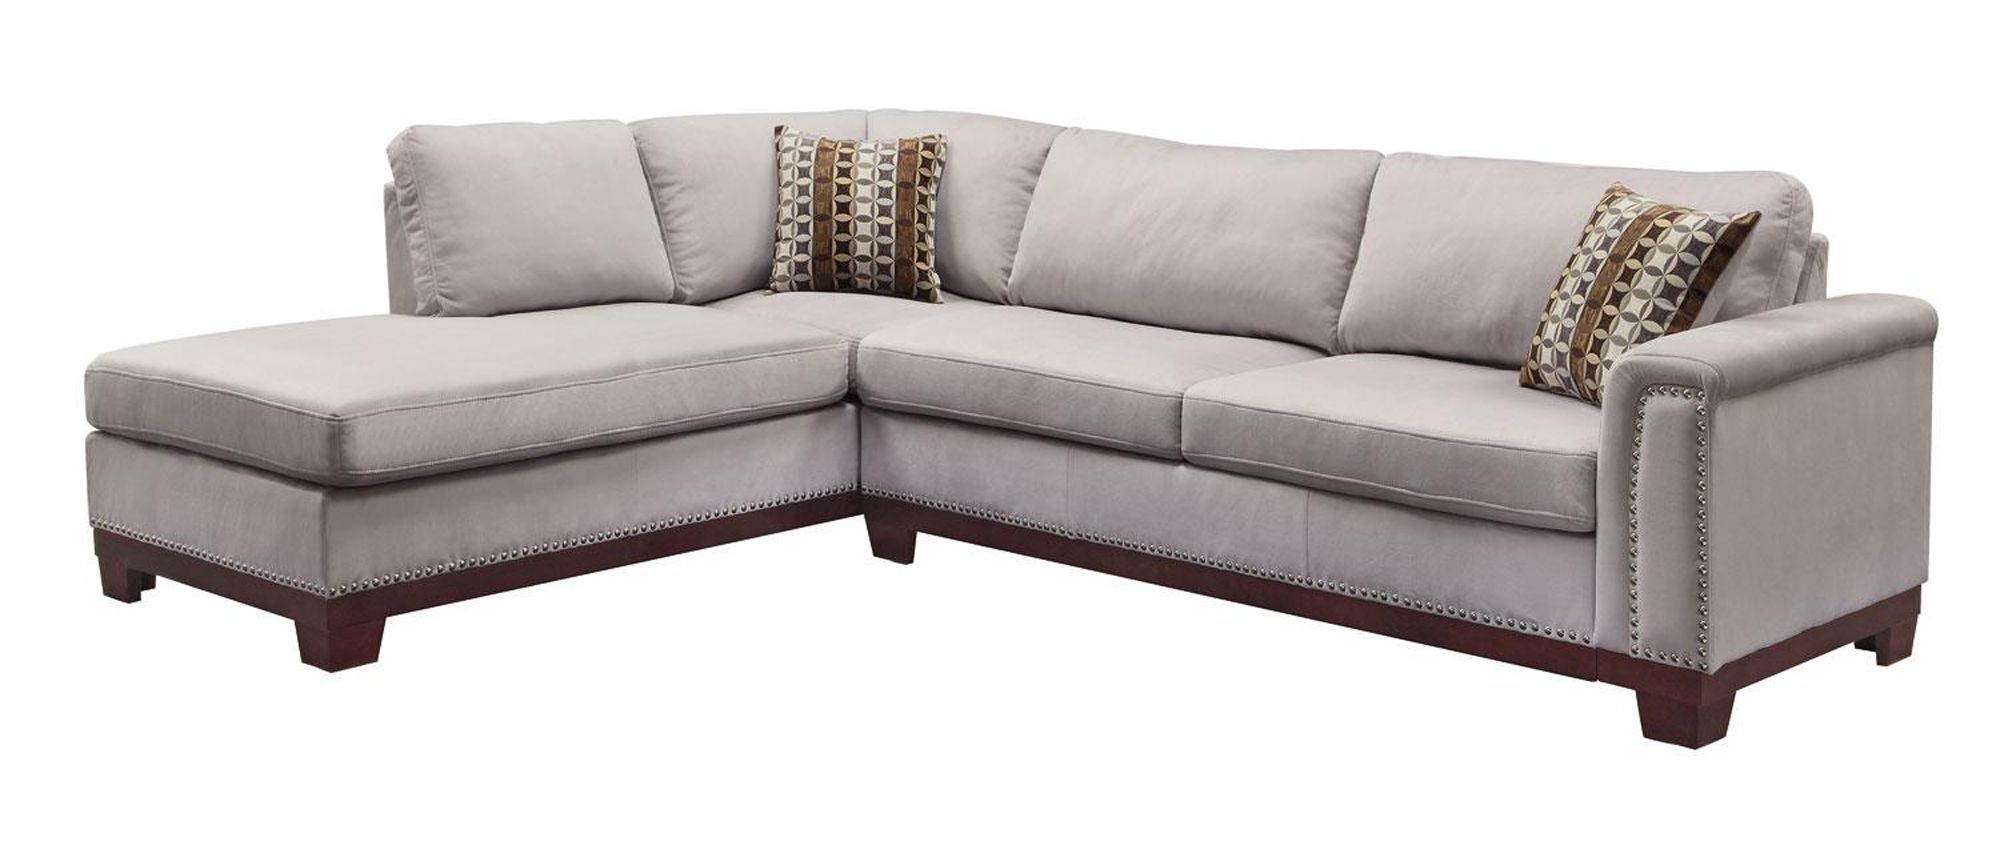 $1051.92 Mason Sectional Sofa With Nailhead Trim And Accent Pillows Intended For Sectional Sofas With Nailhead Trim (Photo 2 of 10)